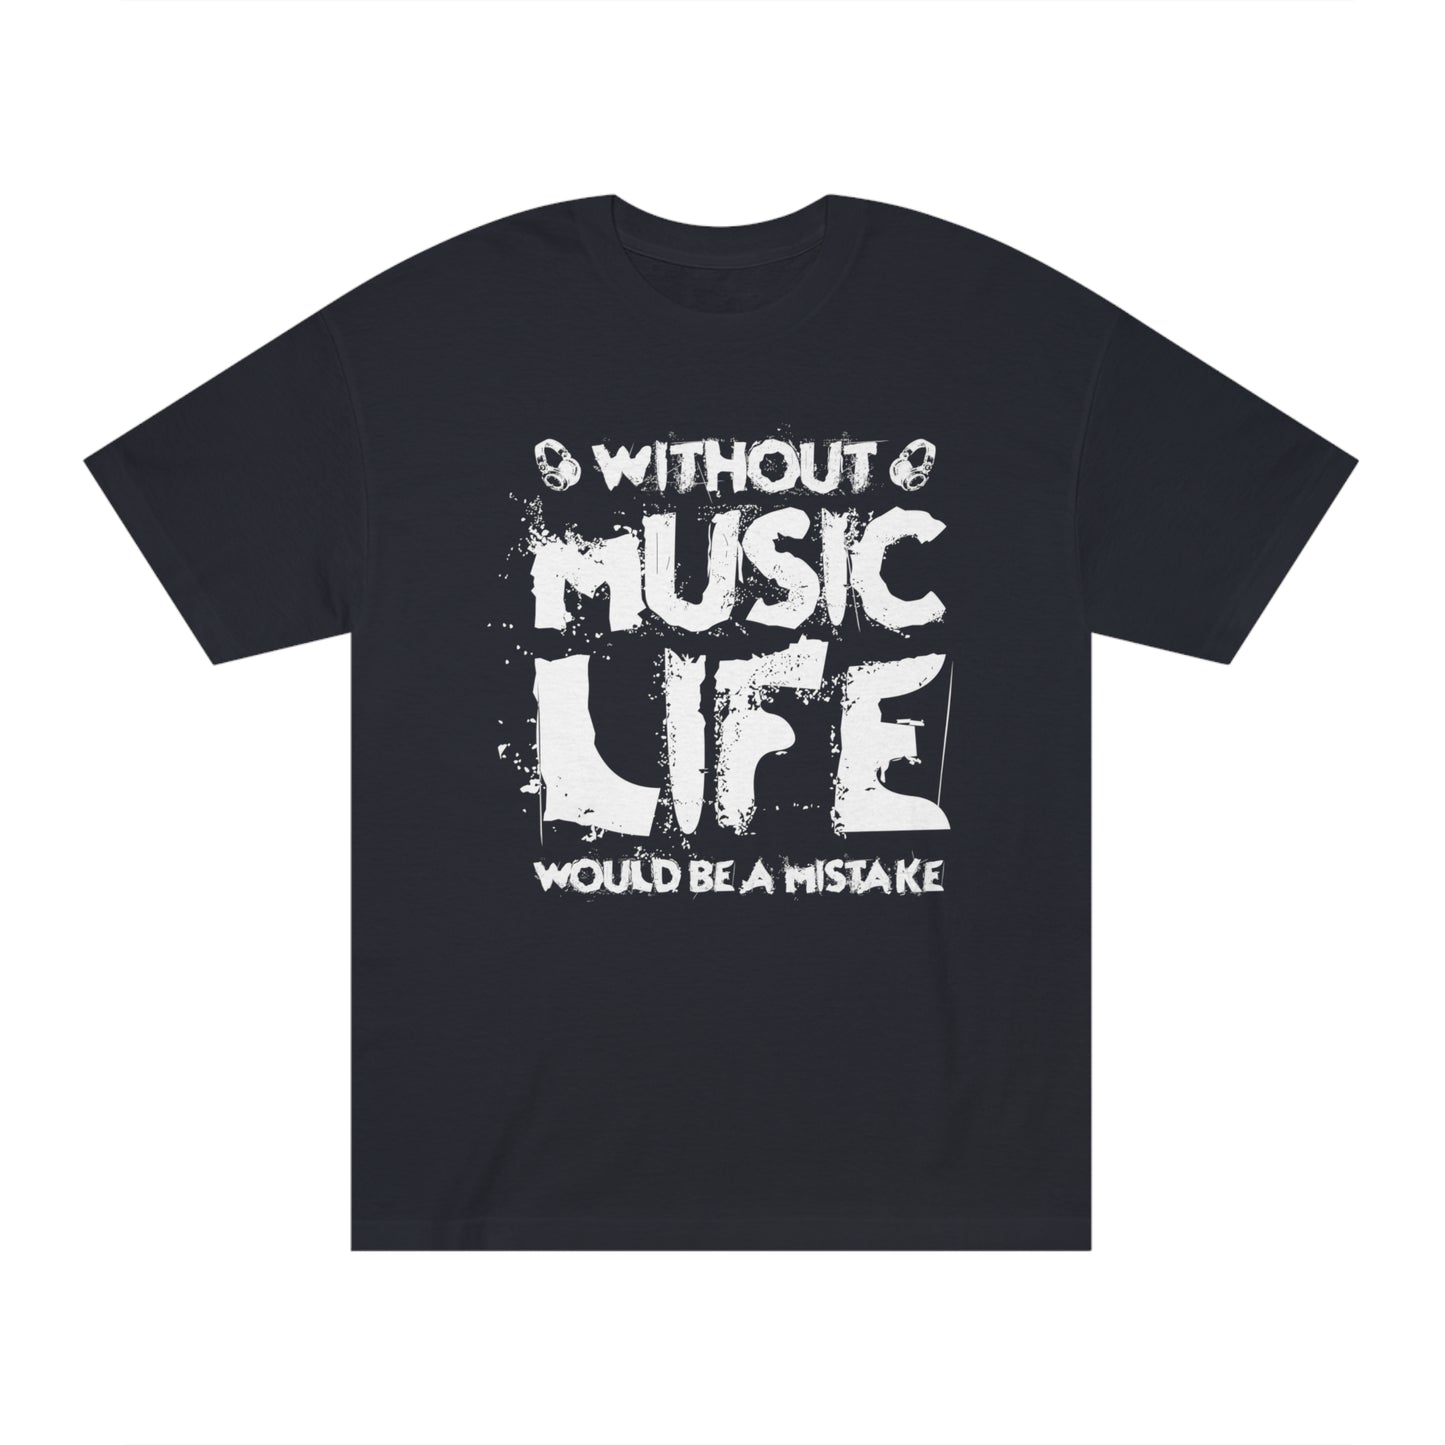 Without music life would be a mistake Unisex Classic Tee